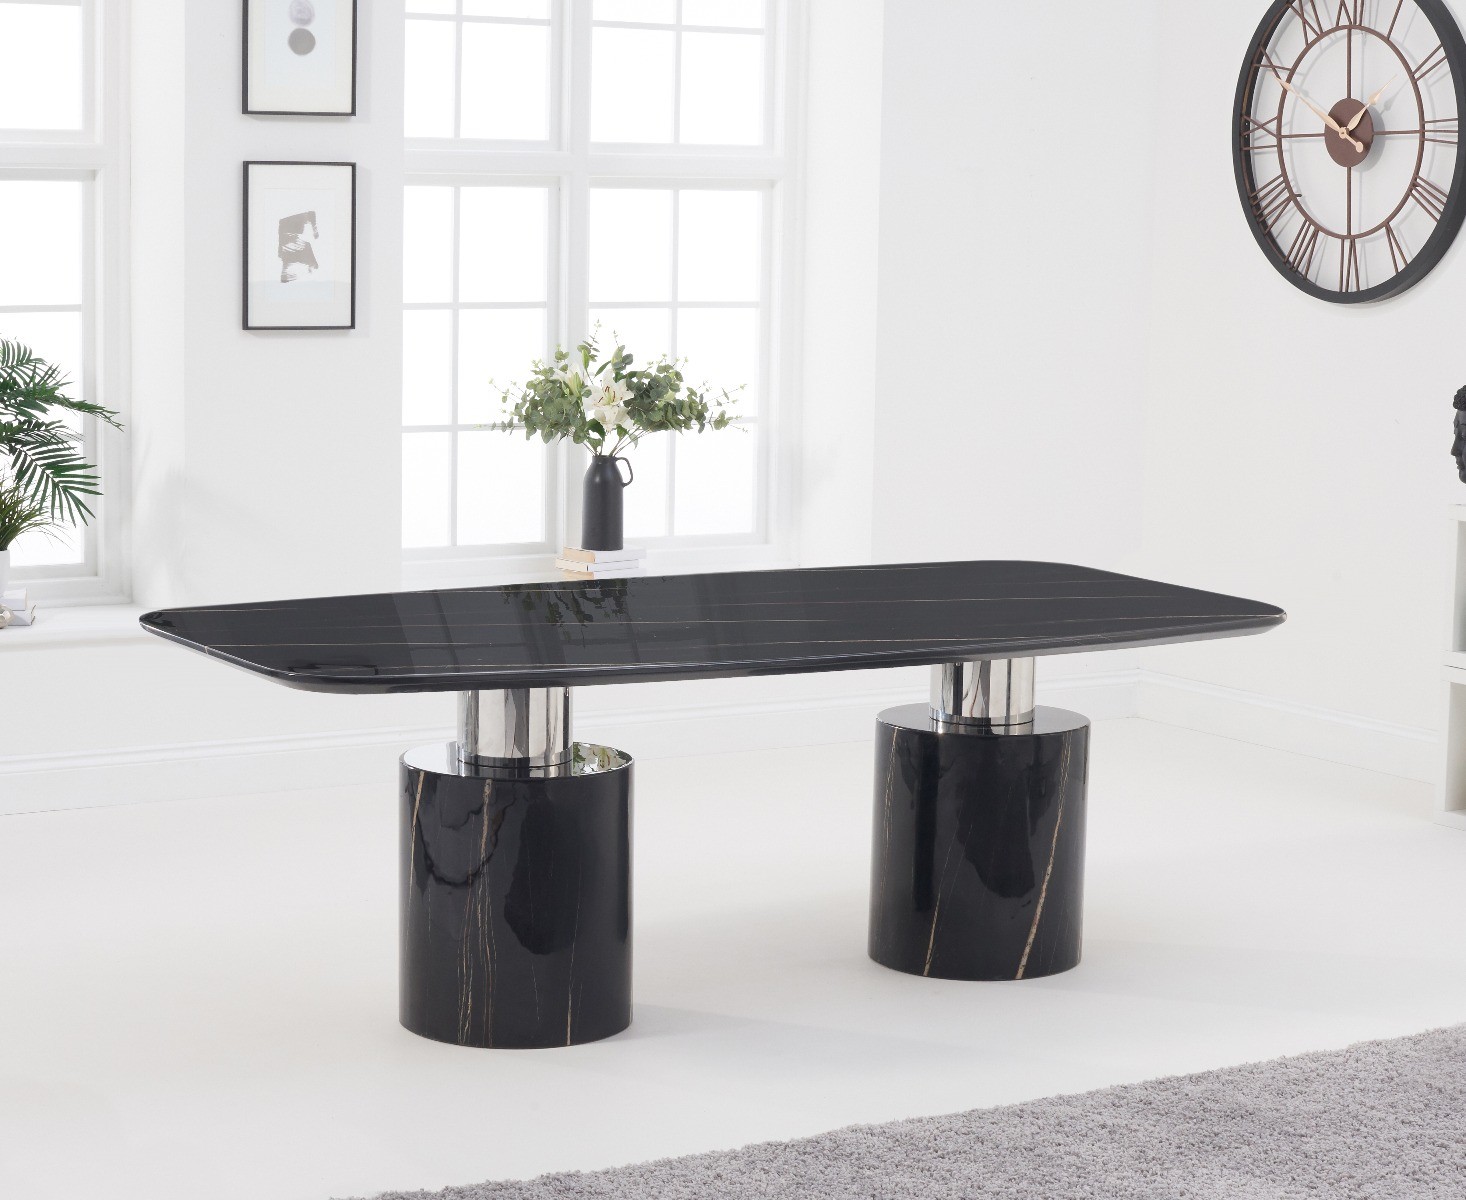 Photo 2 of Antonio 220cm black marble dining table with 6 grey francesca chairs